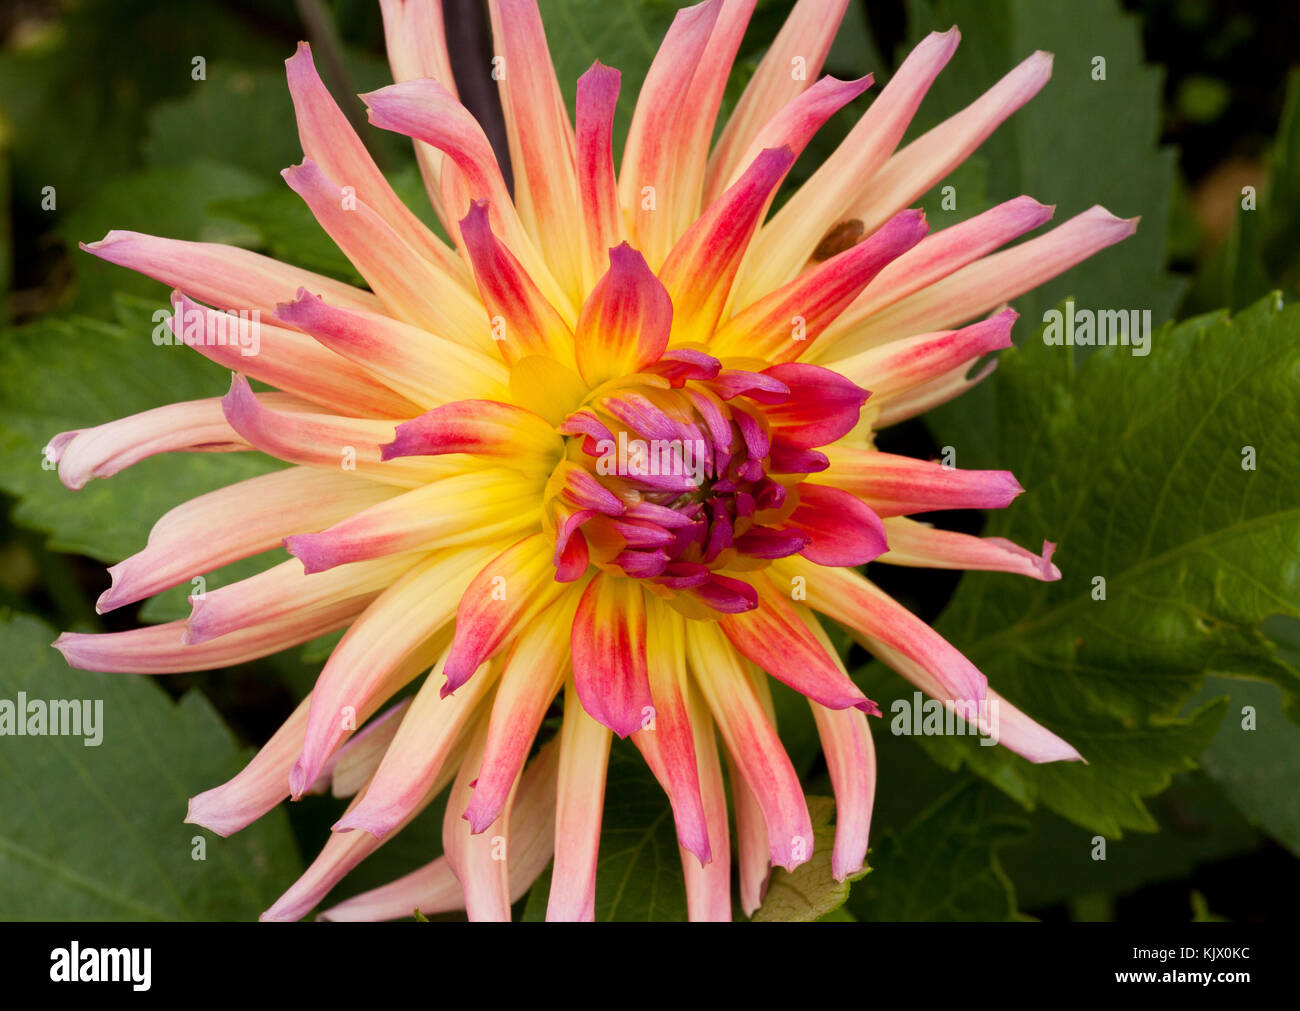 A flowering pink and yellow Dahlia Stock Photo